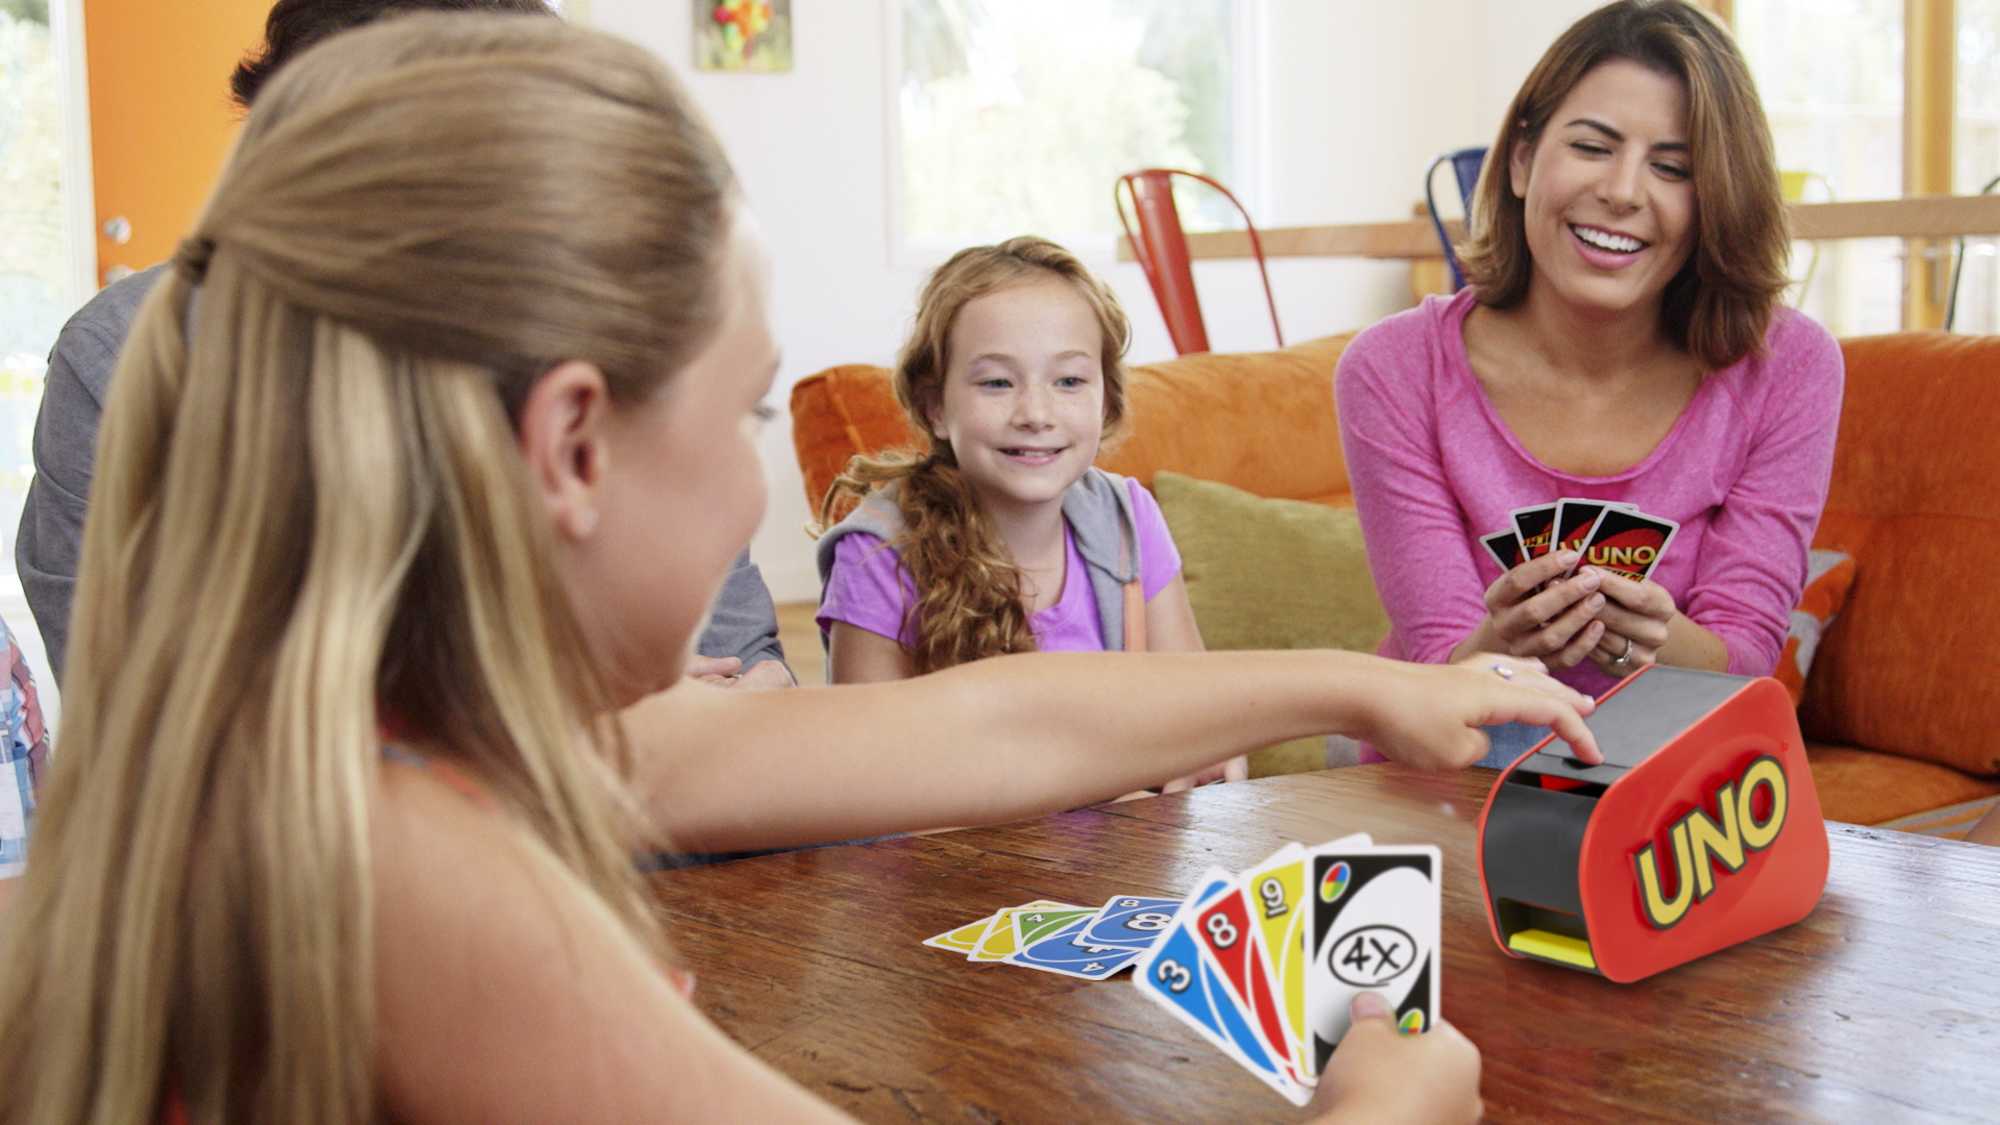 UNO Attack Card Game for Family Night with Card Launcher Featuring Lights & Sounds - image 3 of 7